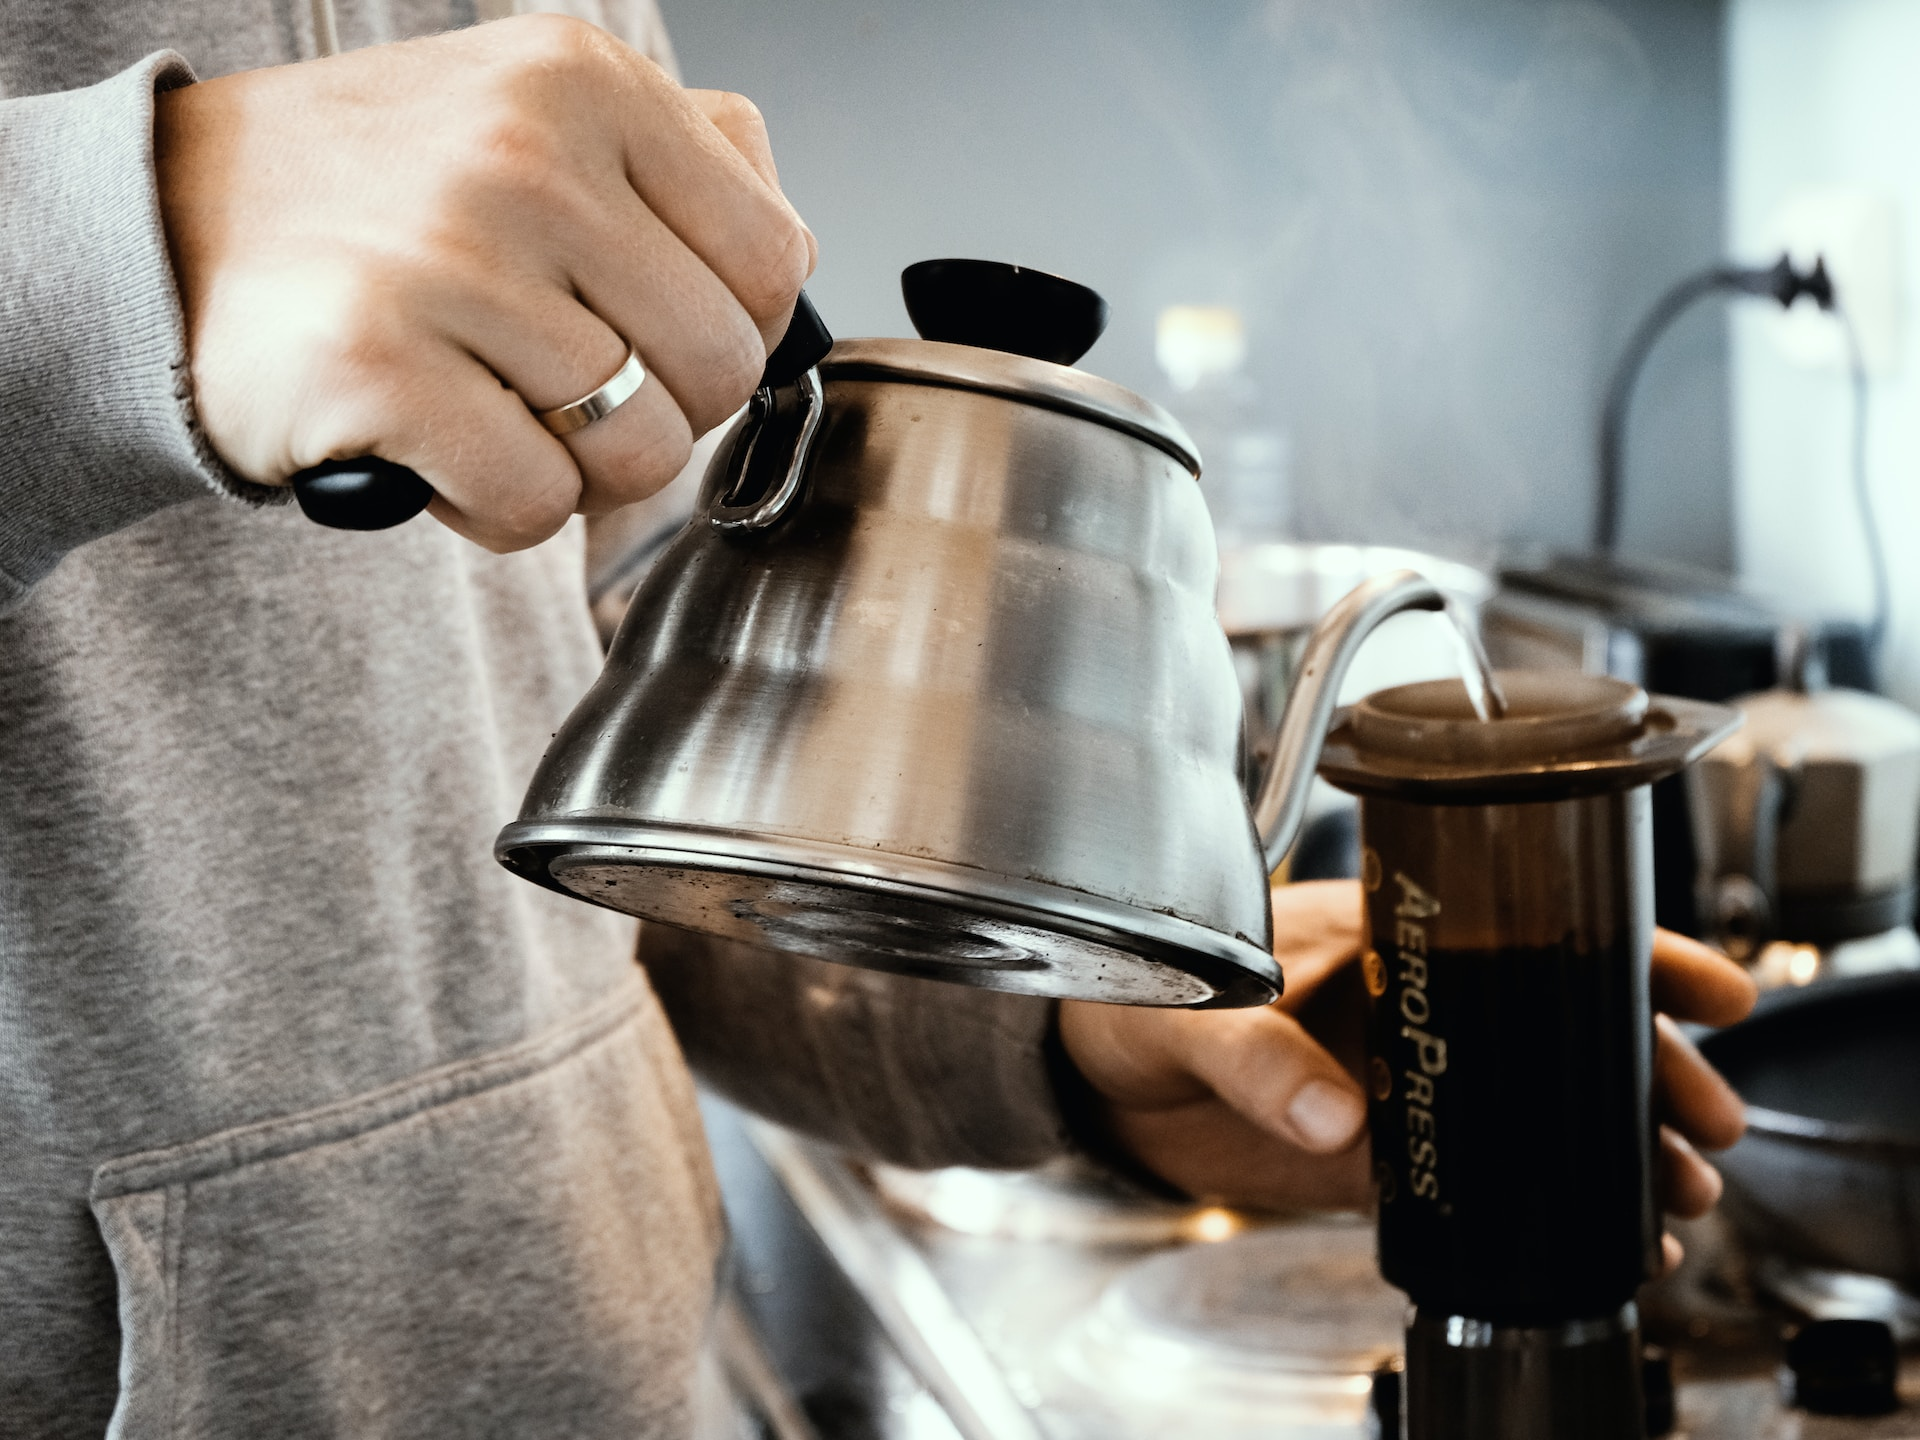 Pouring hot water from a metal pot into an Aeropress brewing device